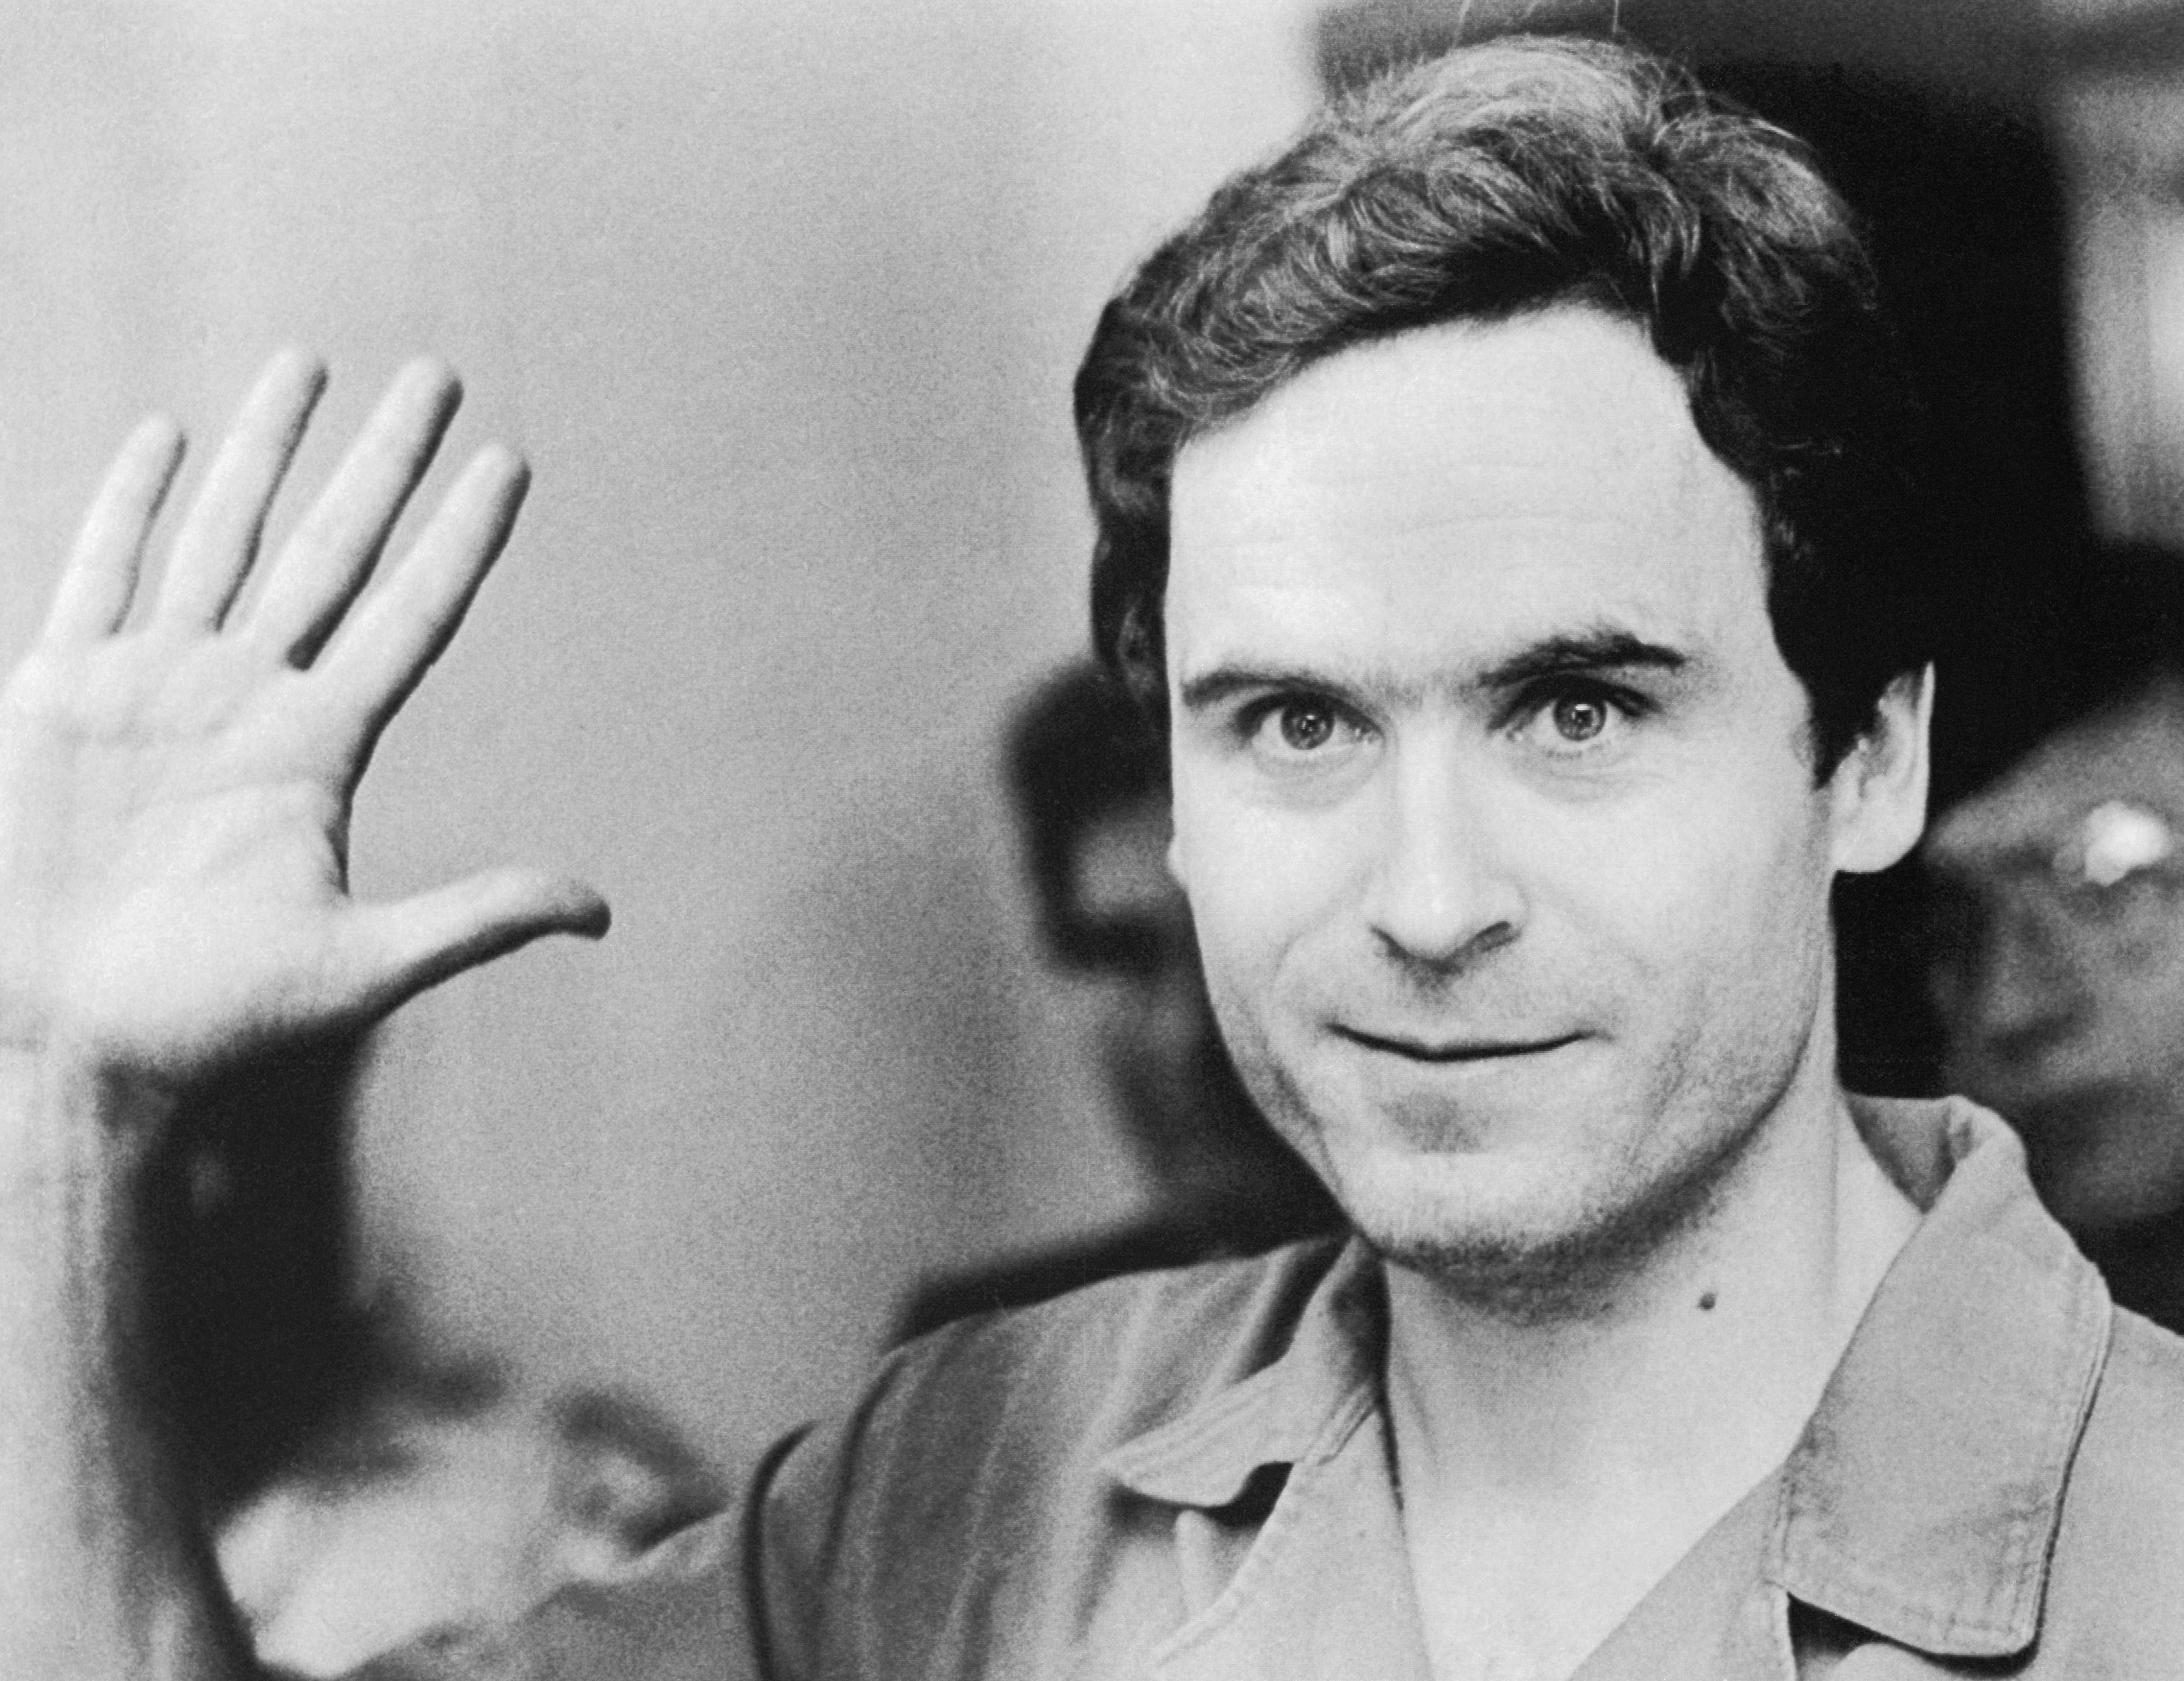 Ted Bundy at the Leon County Jail on July 28, 1978. | Source: Getty Images